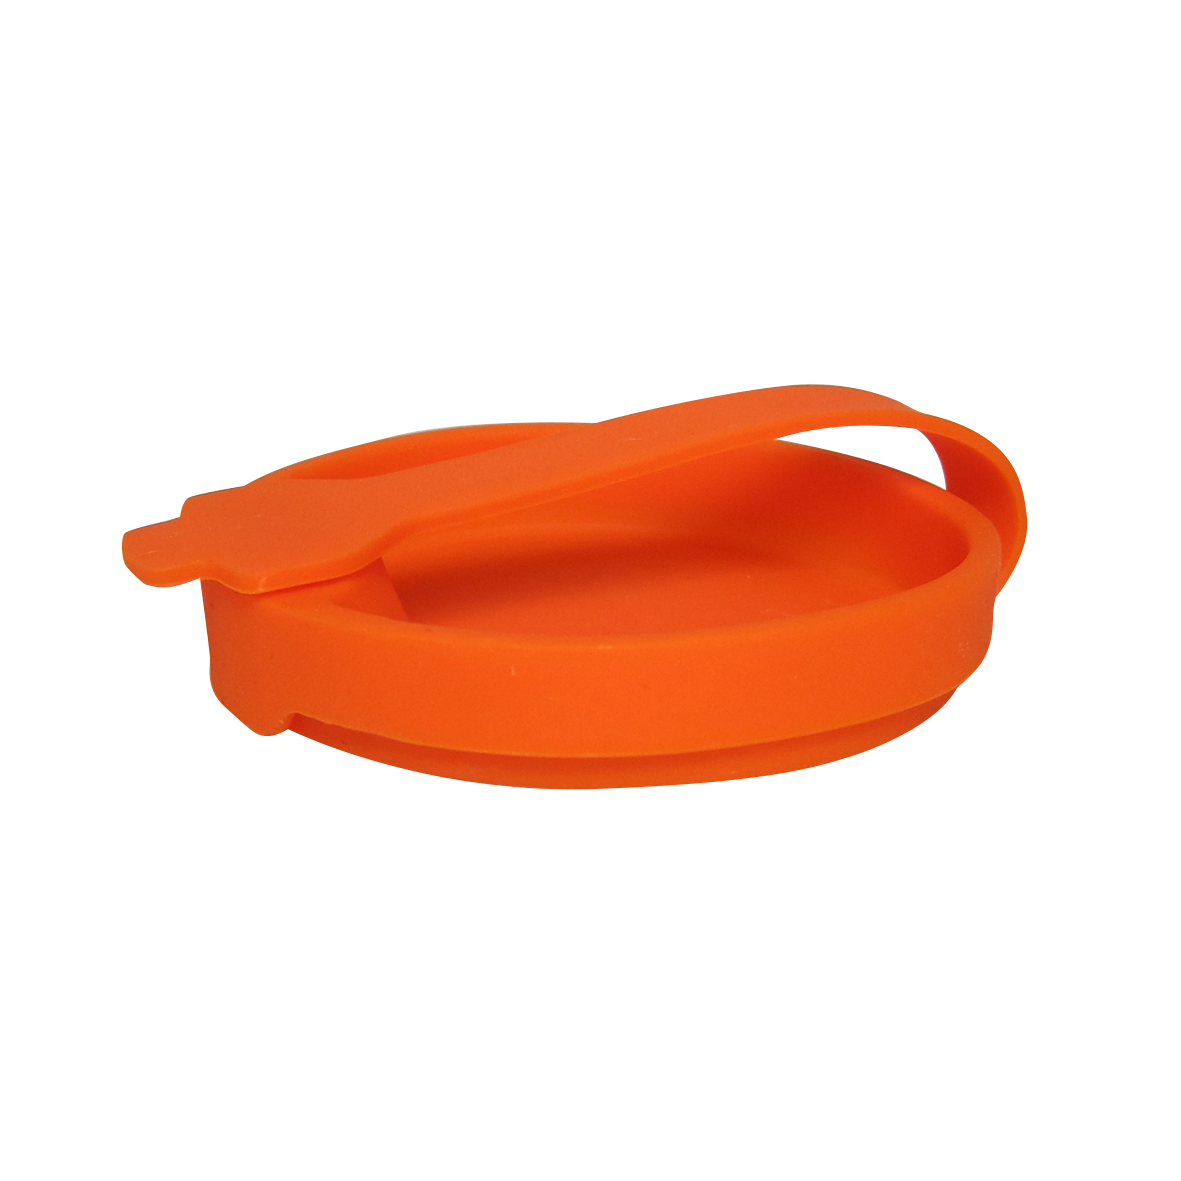 Lid for Re-Fillable Coffee Cup Orange